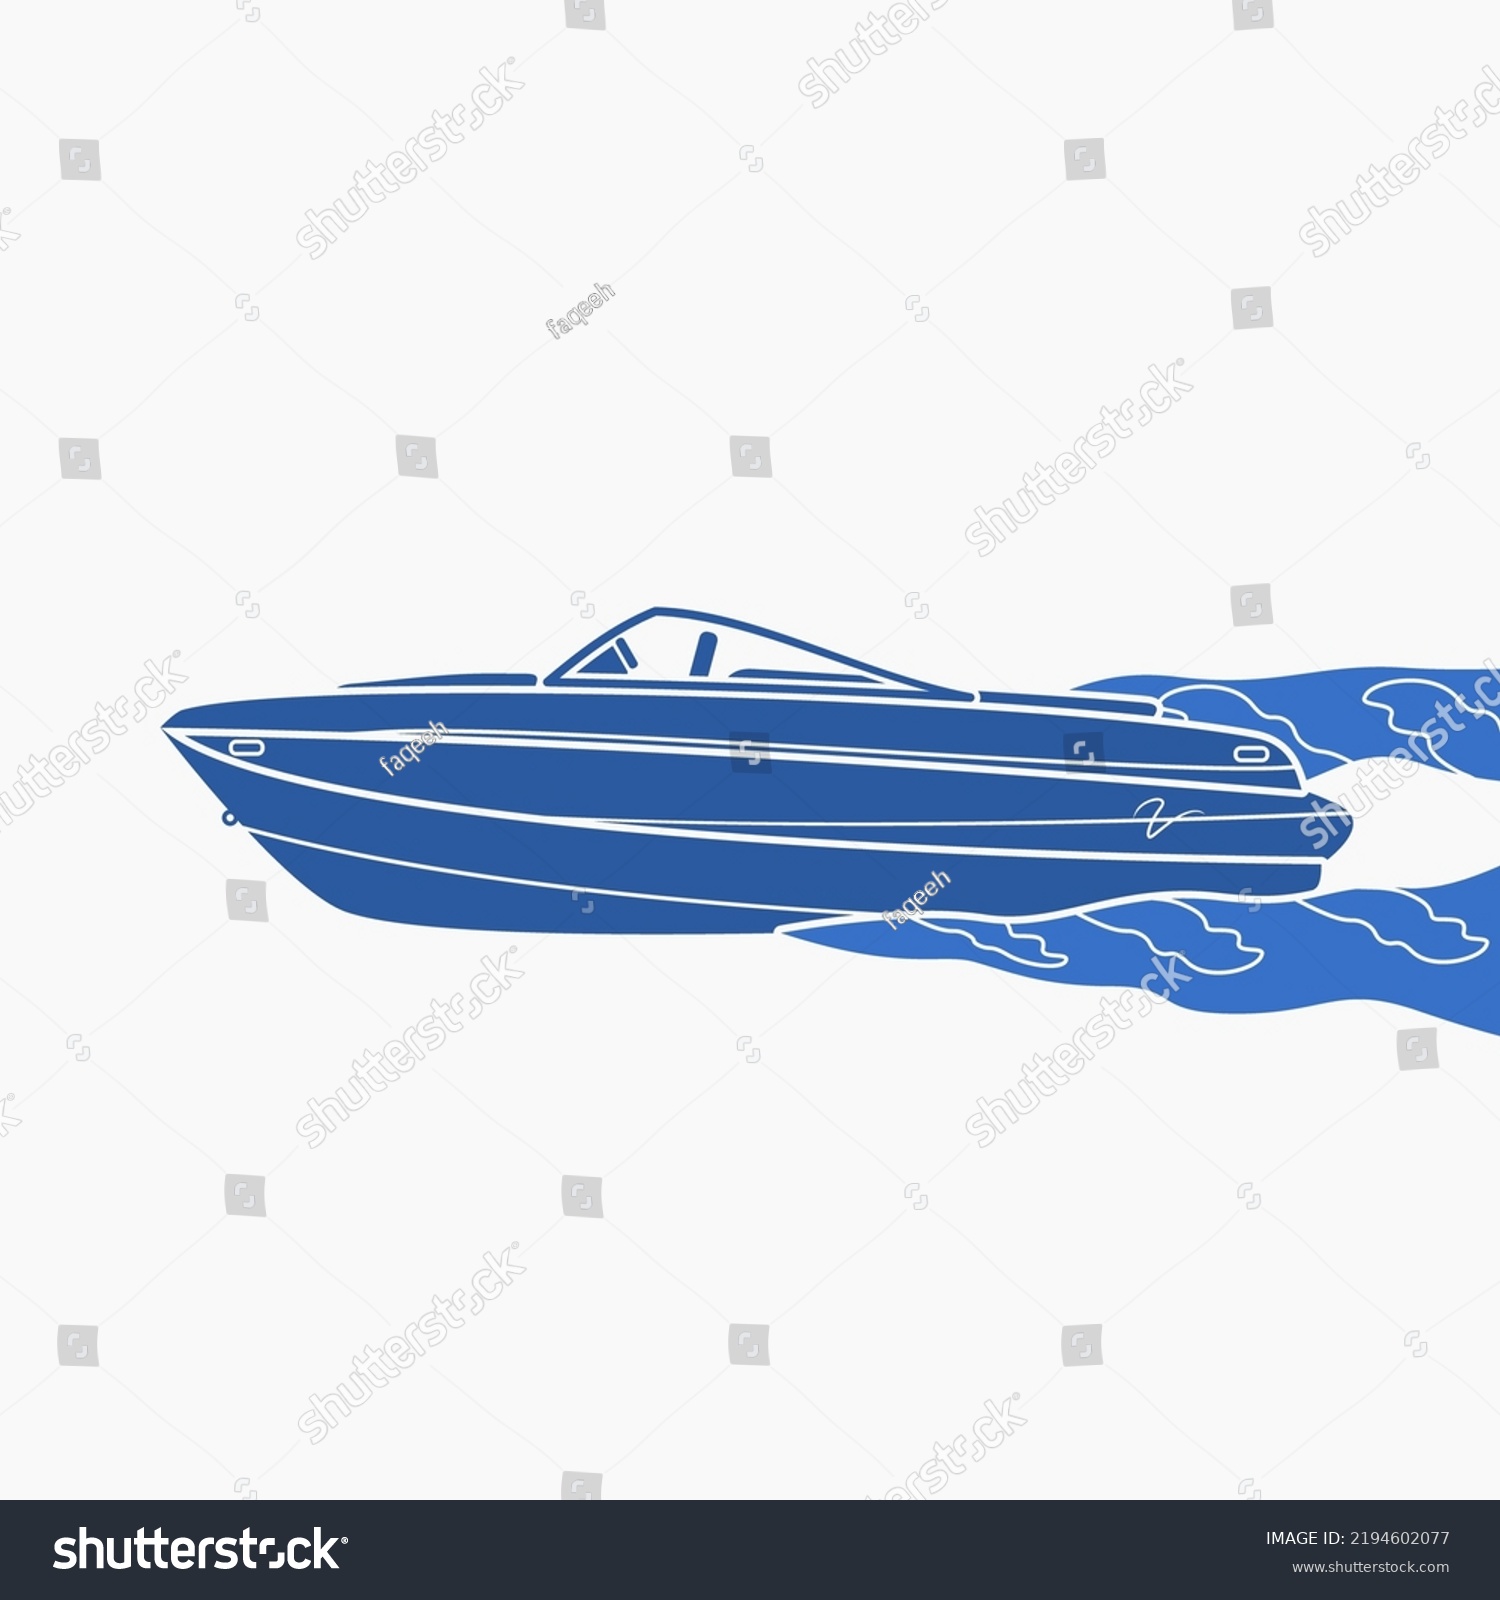 SVG of Editable Side View American Bowrider Boat on Water Vector Illustration in Monochrome Style for Artwork Element of Transportation or Recreation Related Design svg